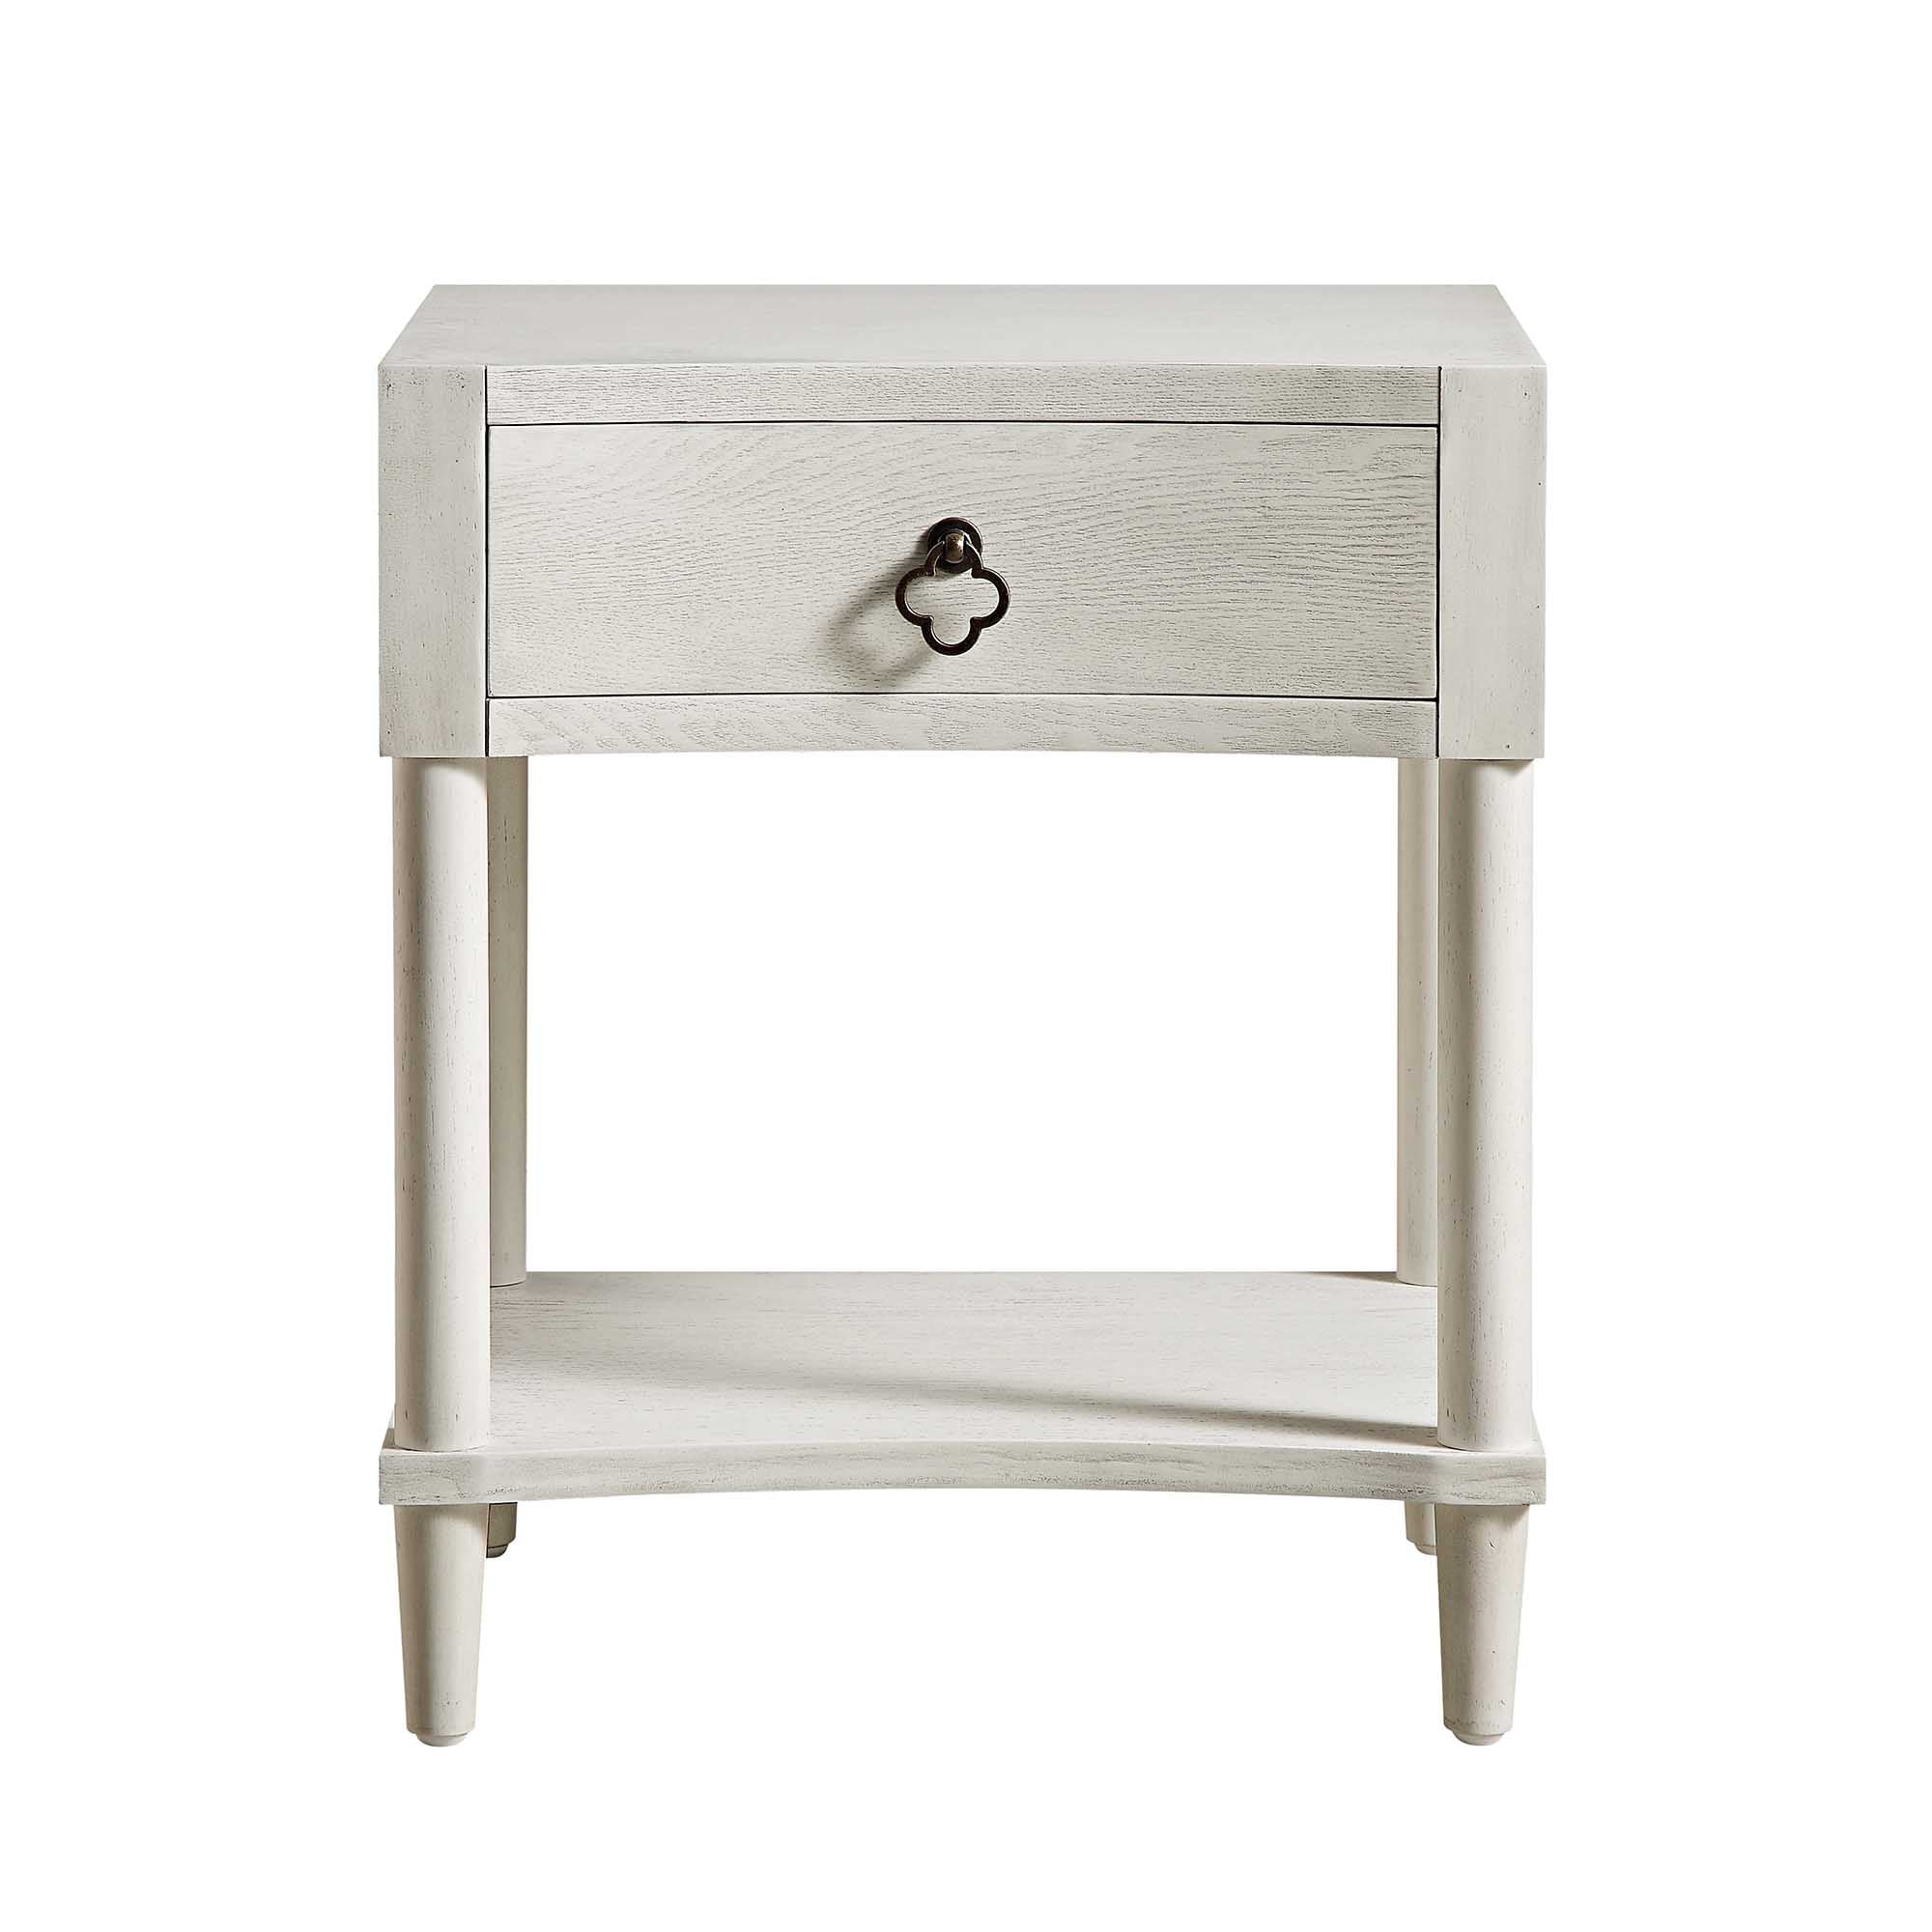 Thalia Concave 1 Drawer Bedside Table, Washed White